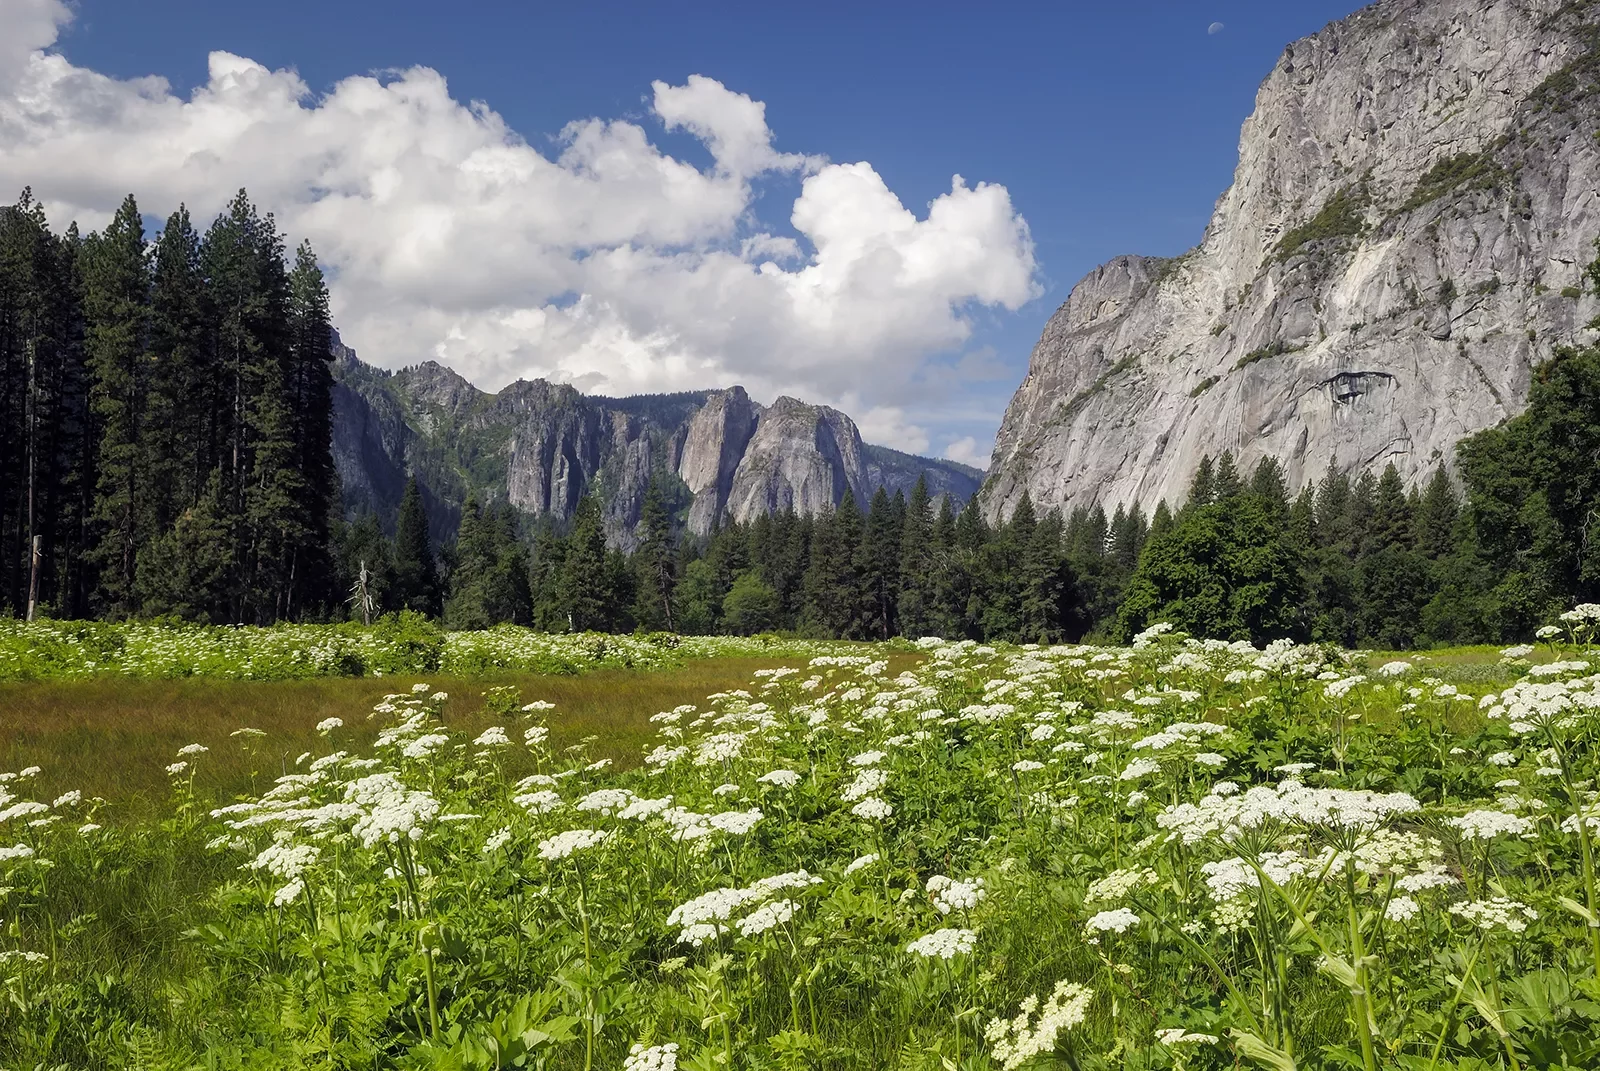 Wide shot of flowery meadow, mountains in background.